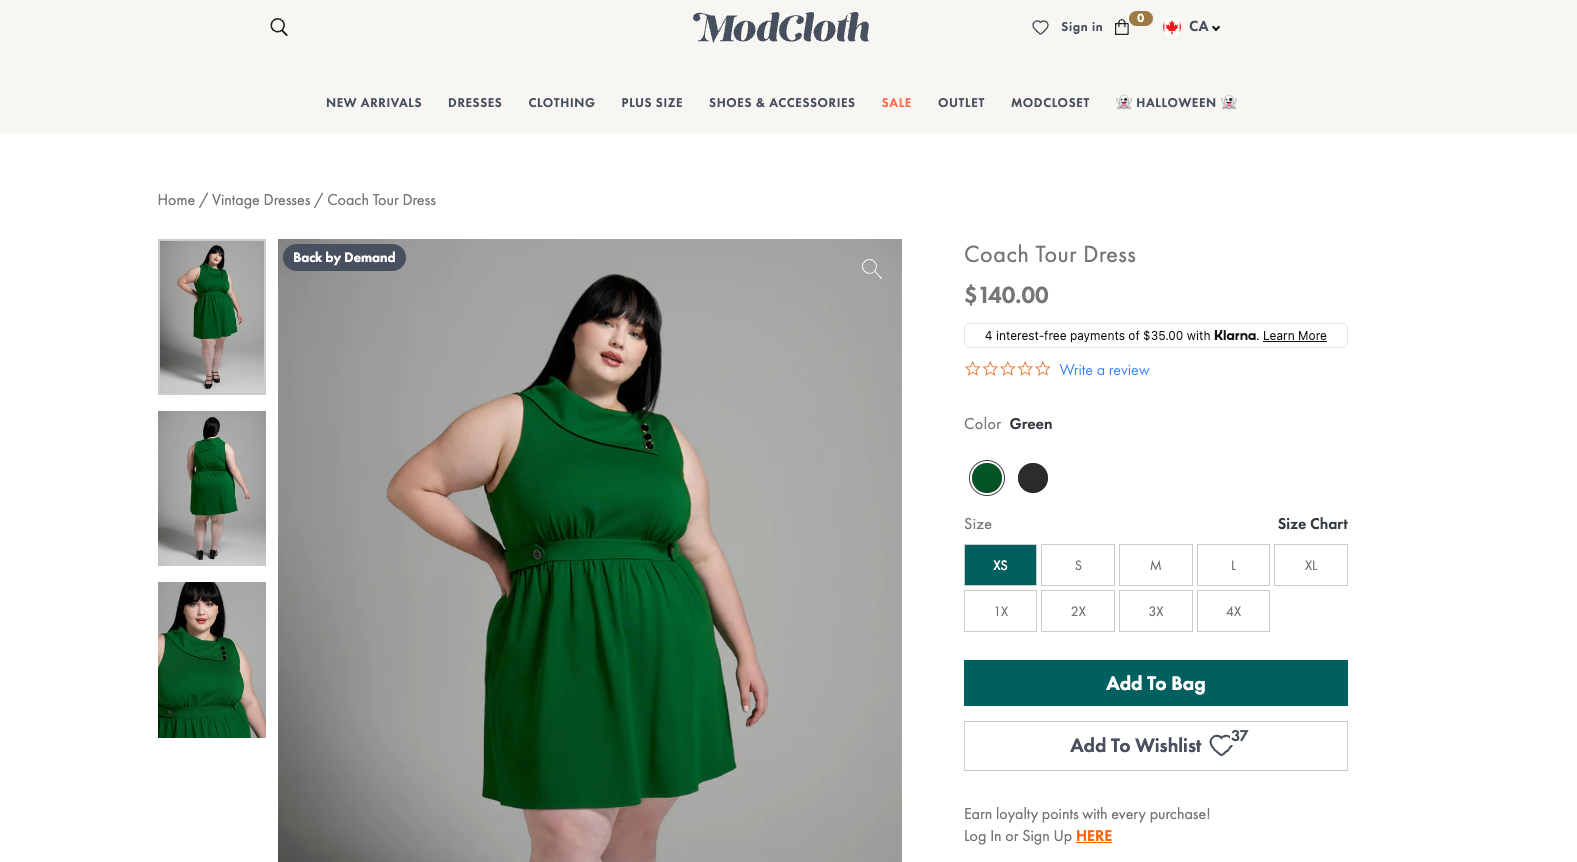 ModCloth’s Add to Wishlist feature